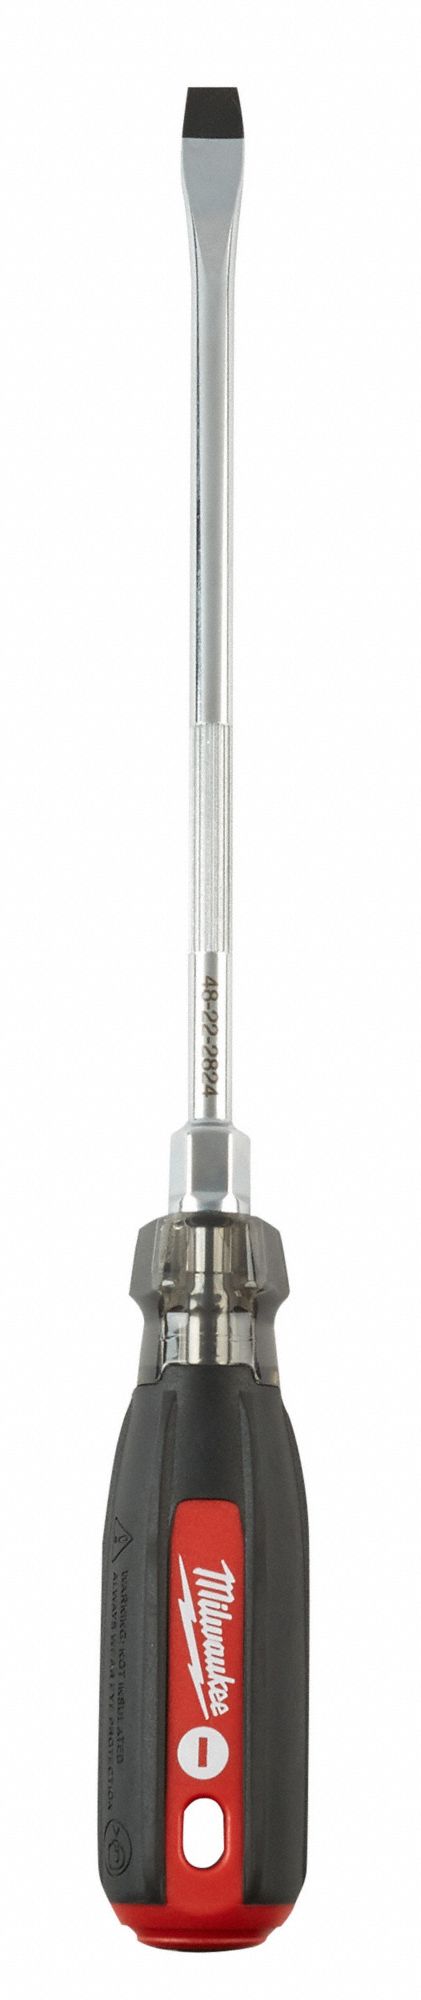 MILWAUKEE SLOTTED SCREWDRIVER, 3/8 IN TIP, CUSHION